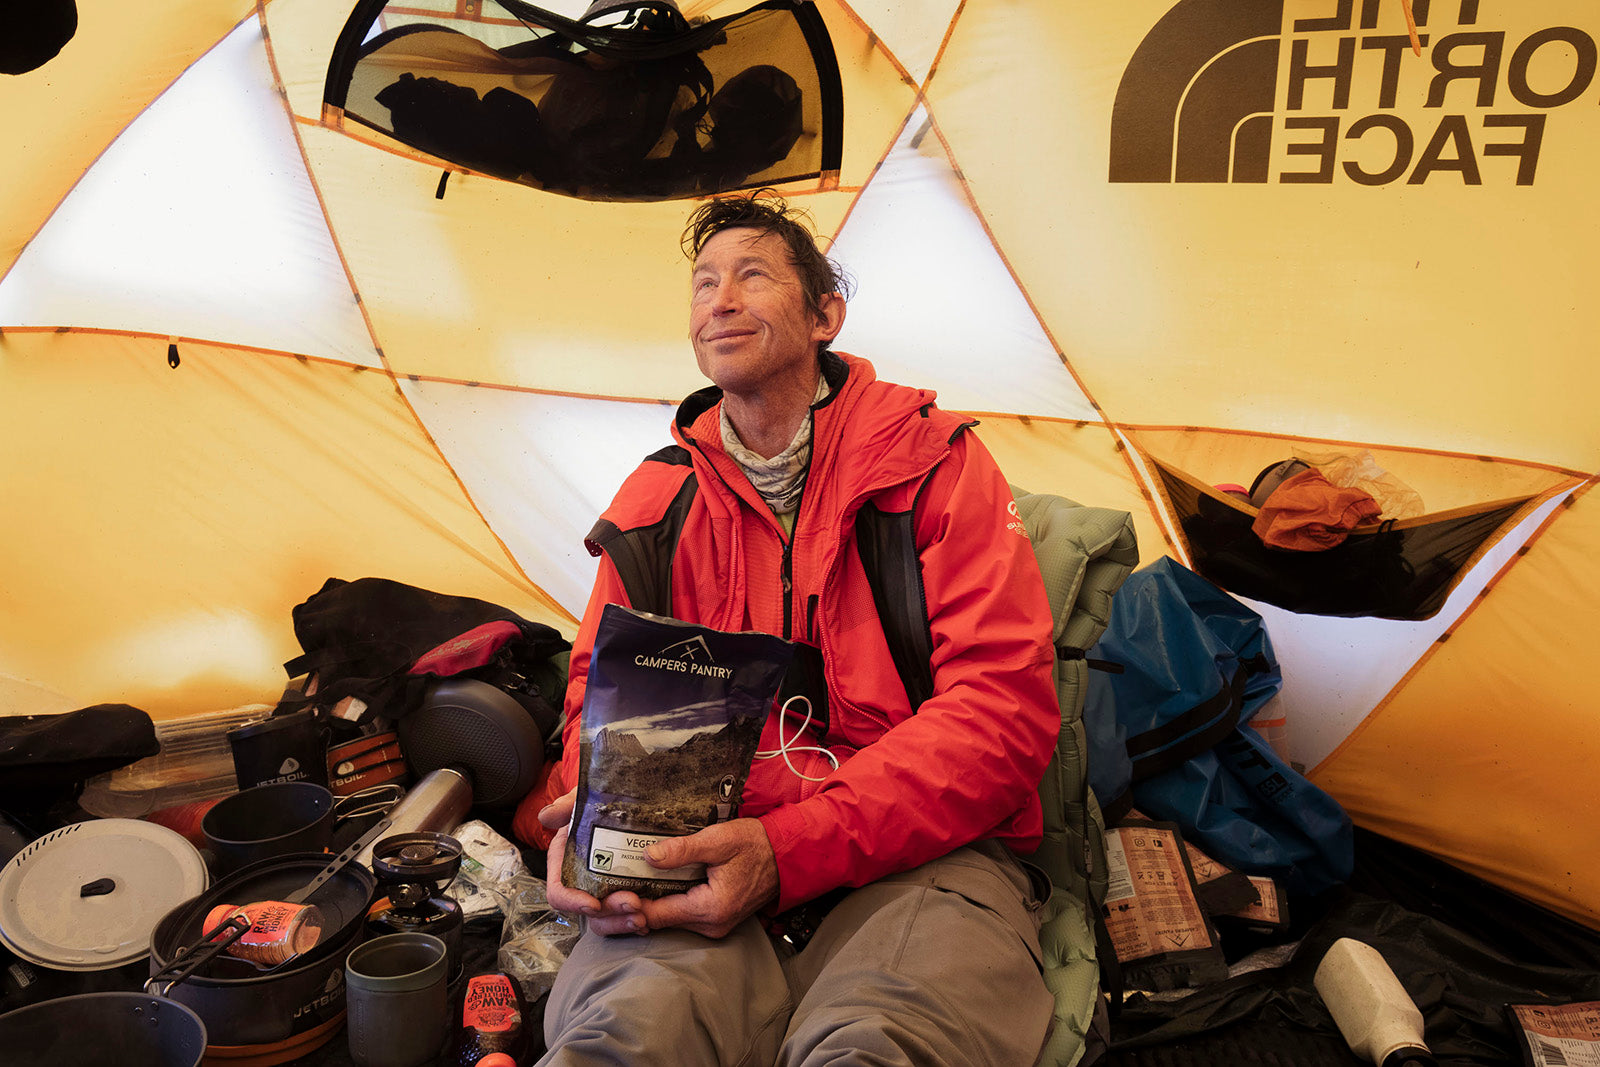 Our Campers Pantry food is a good alternative for Radix Nutrition and Backcountry Cuisine from New Zealand and also Strive Foods from Tasmania. Our hiking food is is ready for your next lightweight adventure